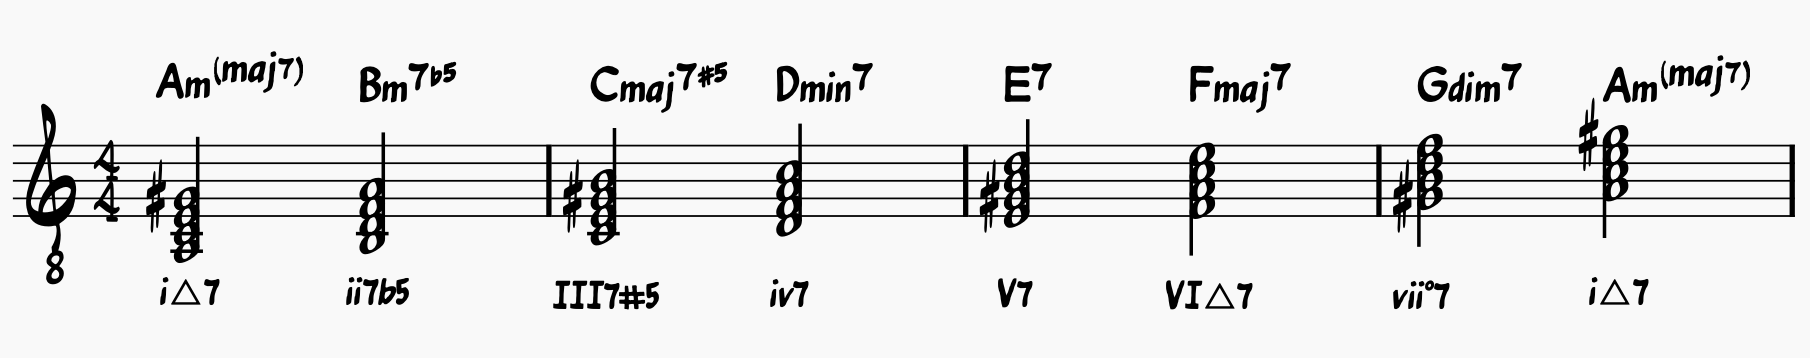 Harmonic minor chord scale with roman numerals.